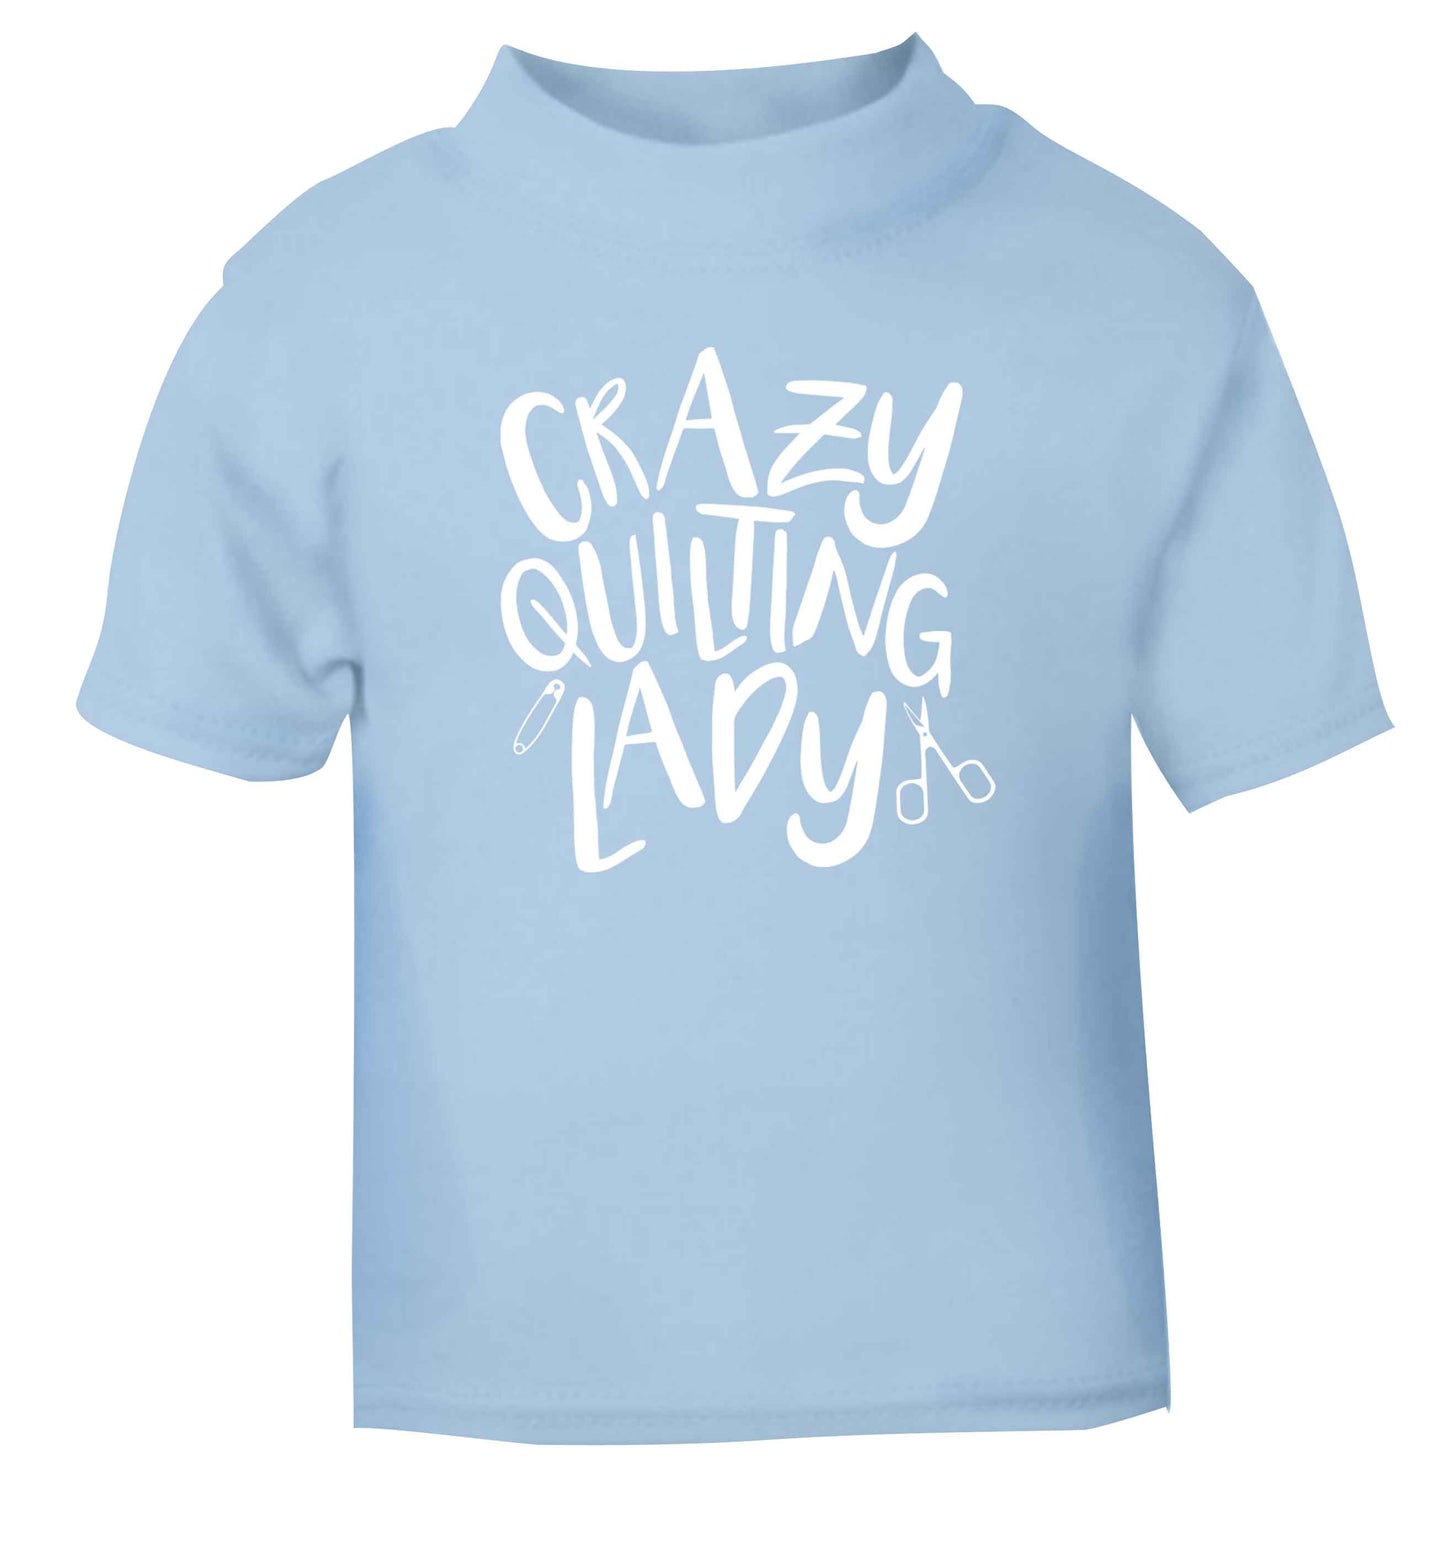 Crazy quilting lady light blue Baby Toddler Tshirt 2 Years